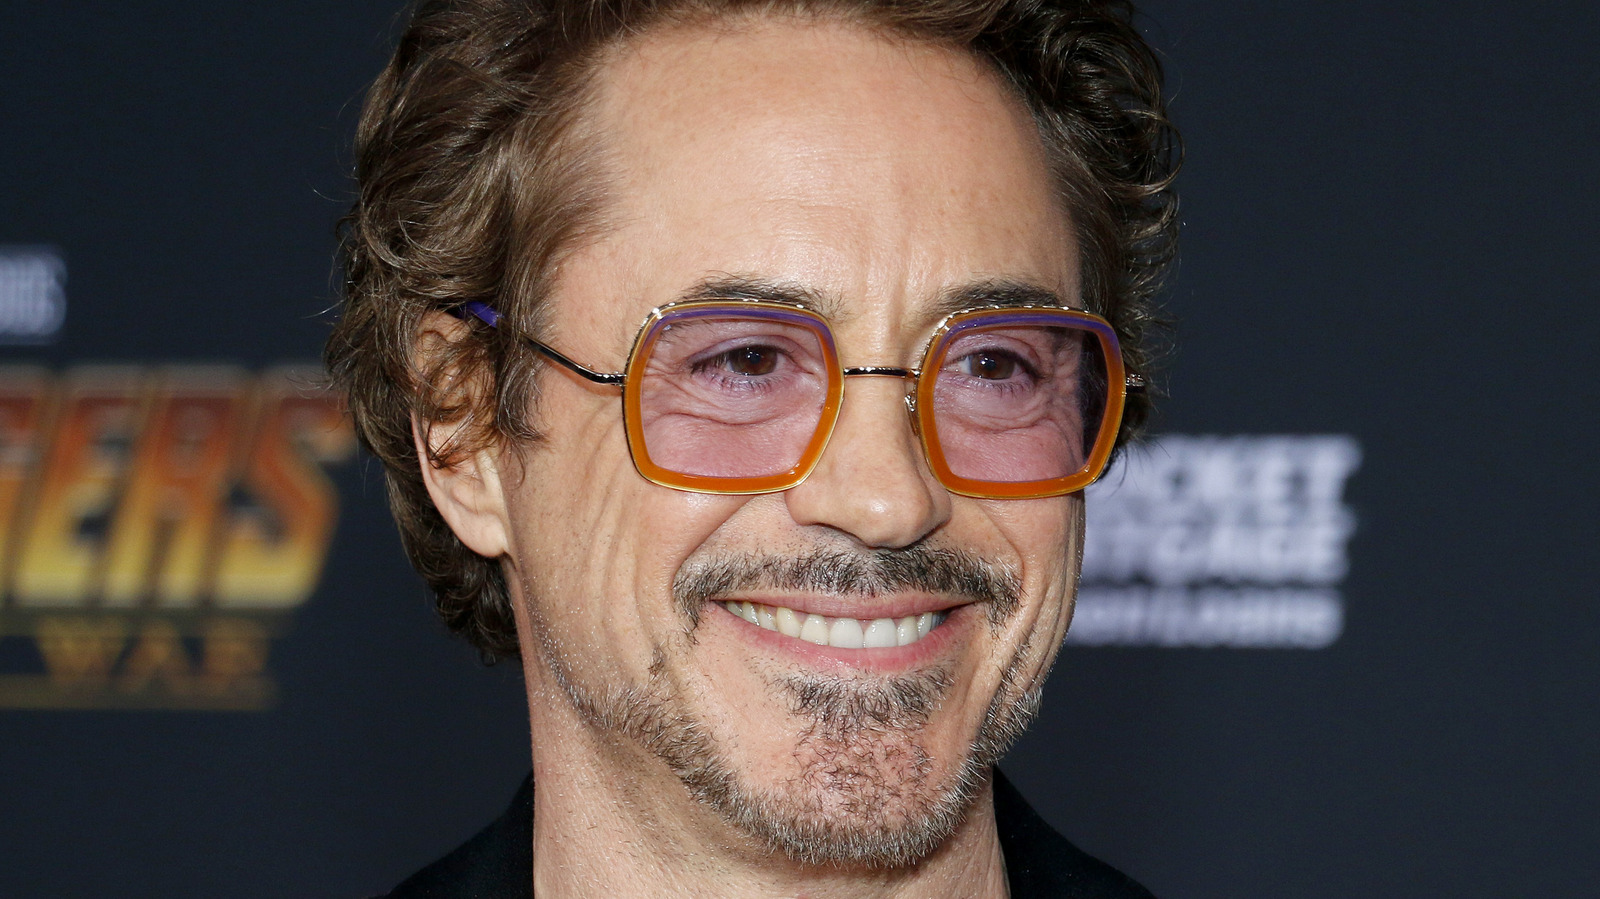 The One Tragedy That Changed Robert Downey Jr Forever